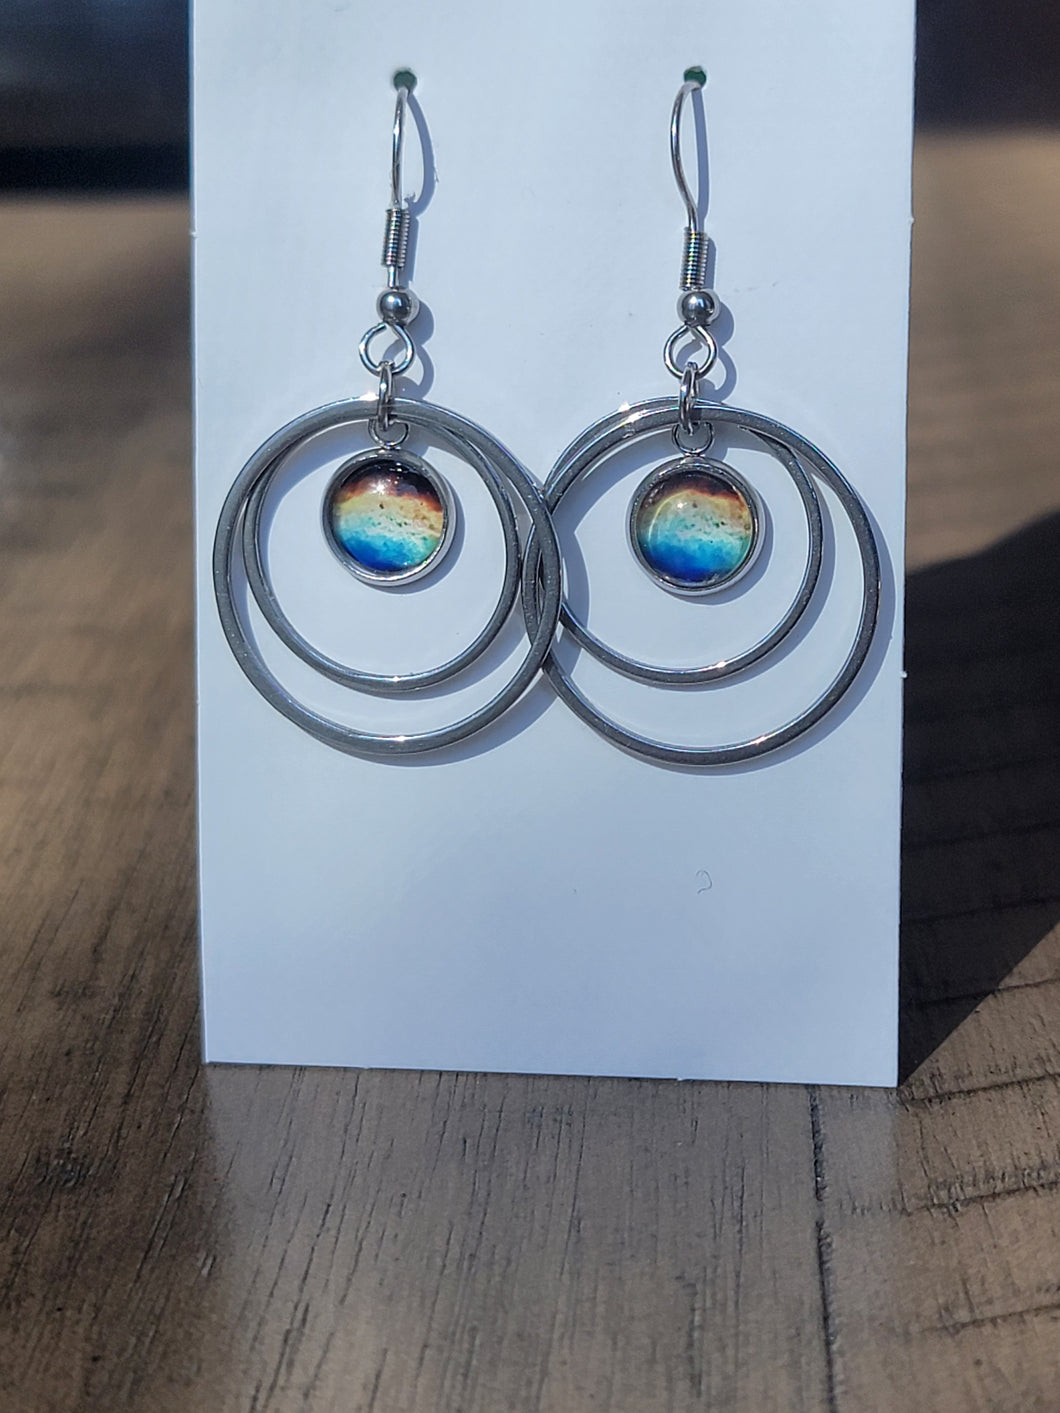 Double circle stainless steel earrings